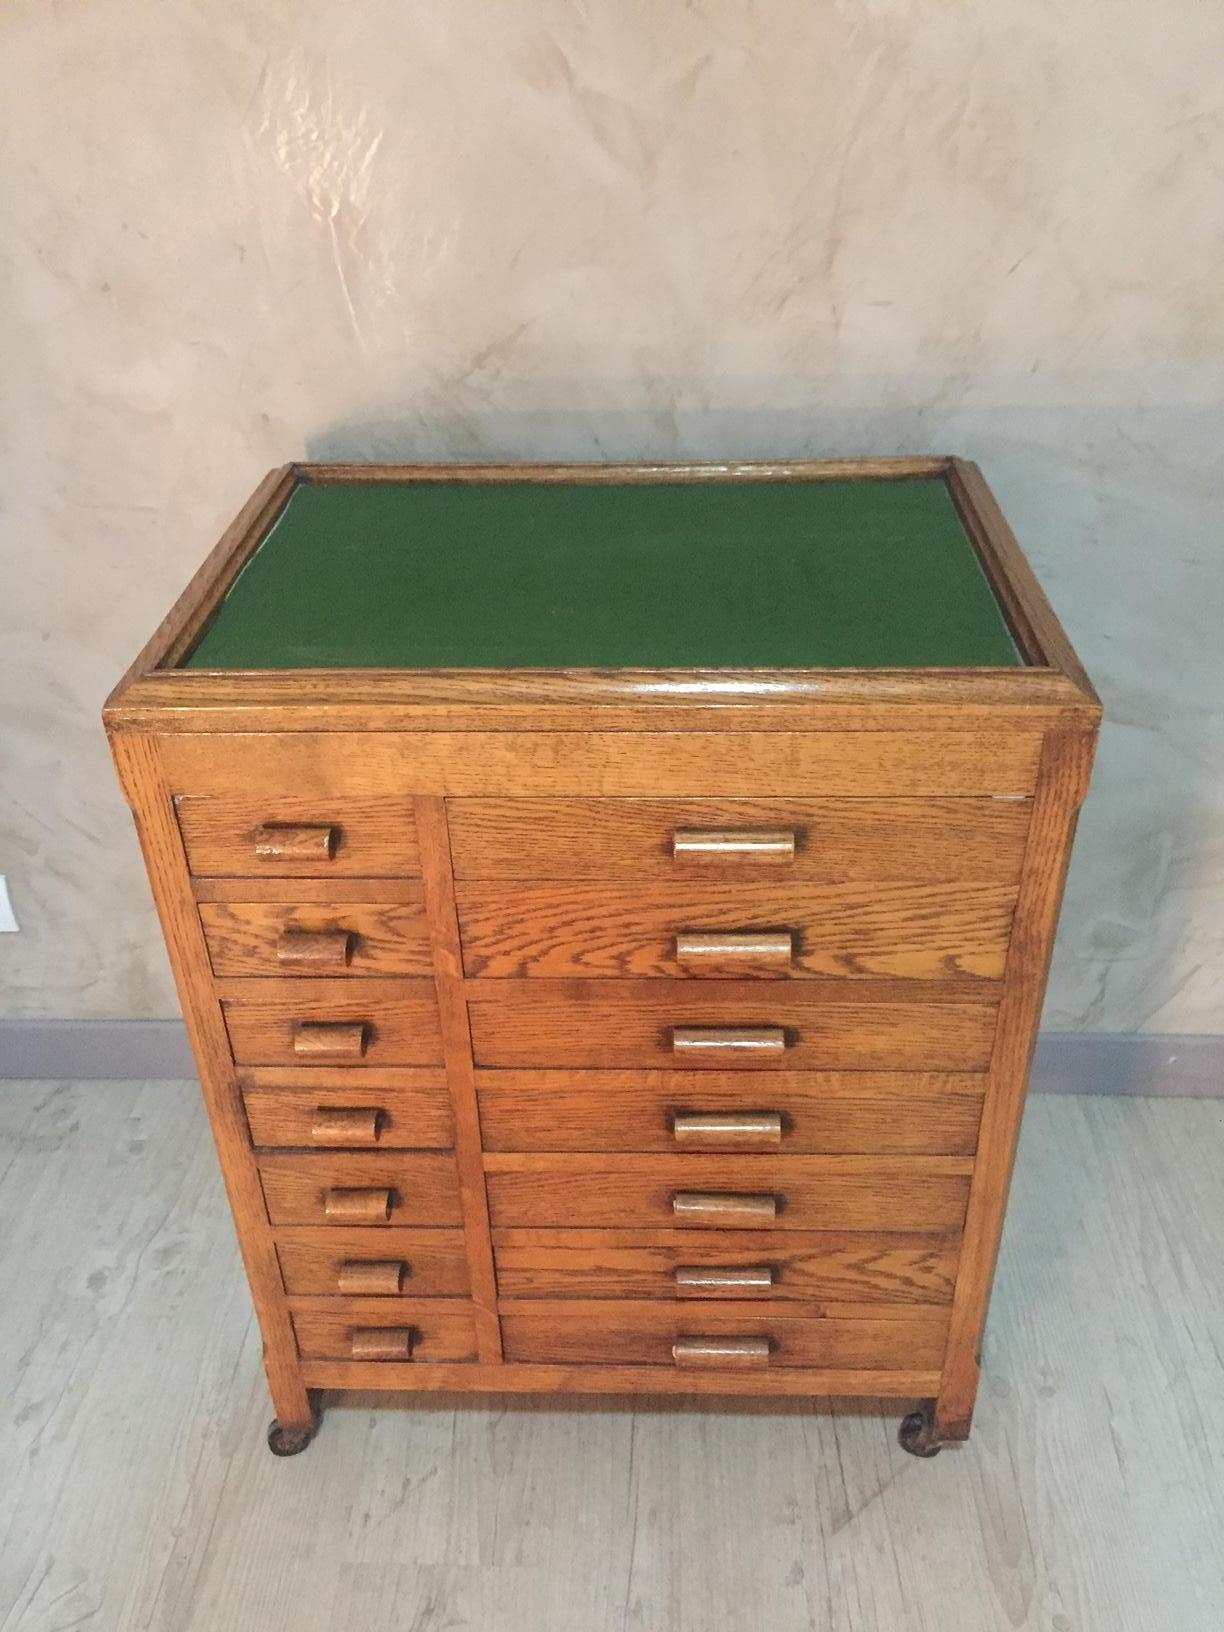 Very nice 20th century French oak workshop chest of drawers on wheels from the 1920s.
Good condition. Green velvet on the top. Many drawers. Paneled wood. Good quality.
  